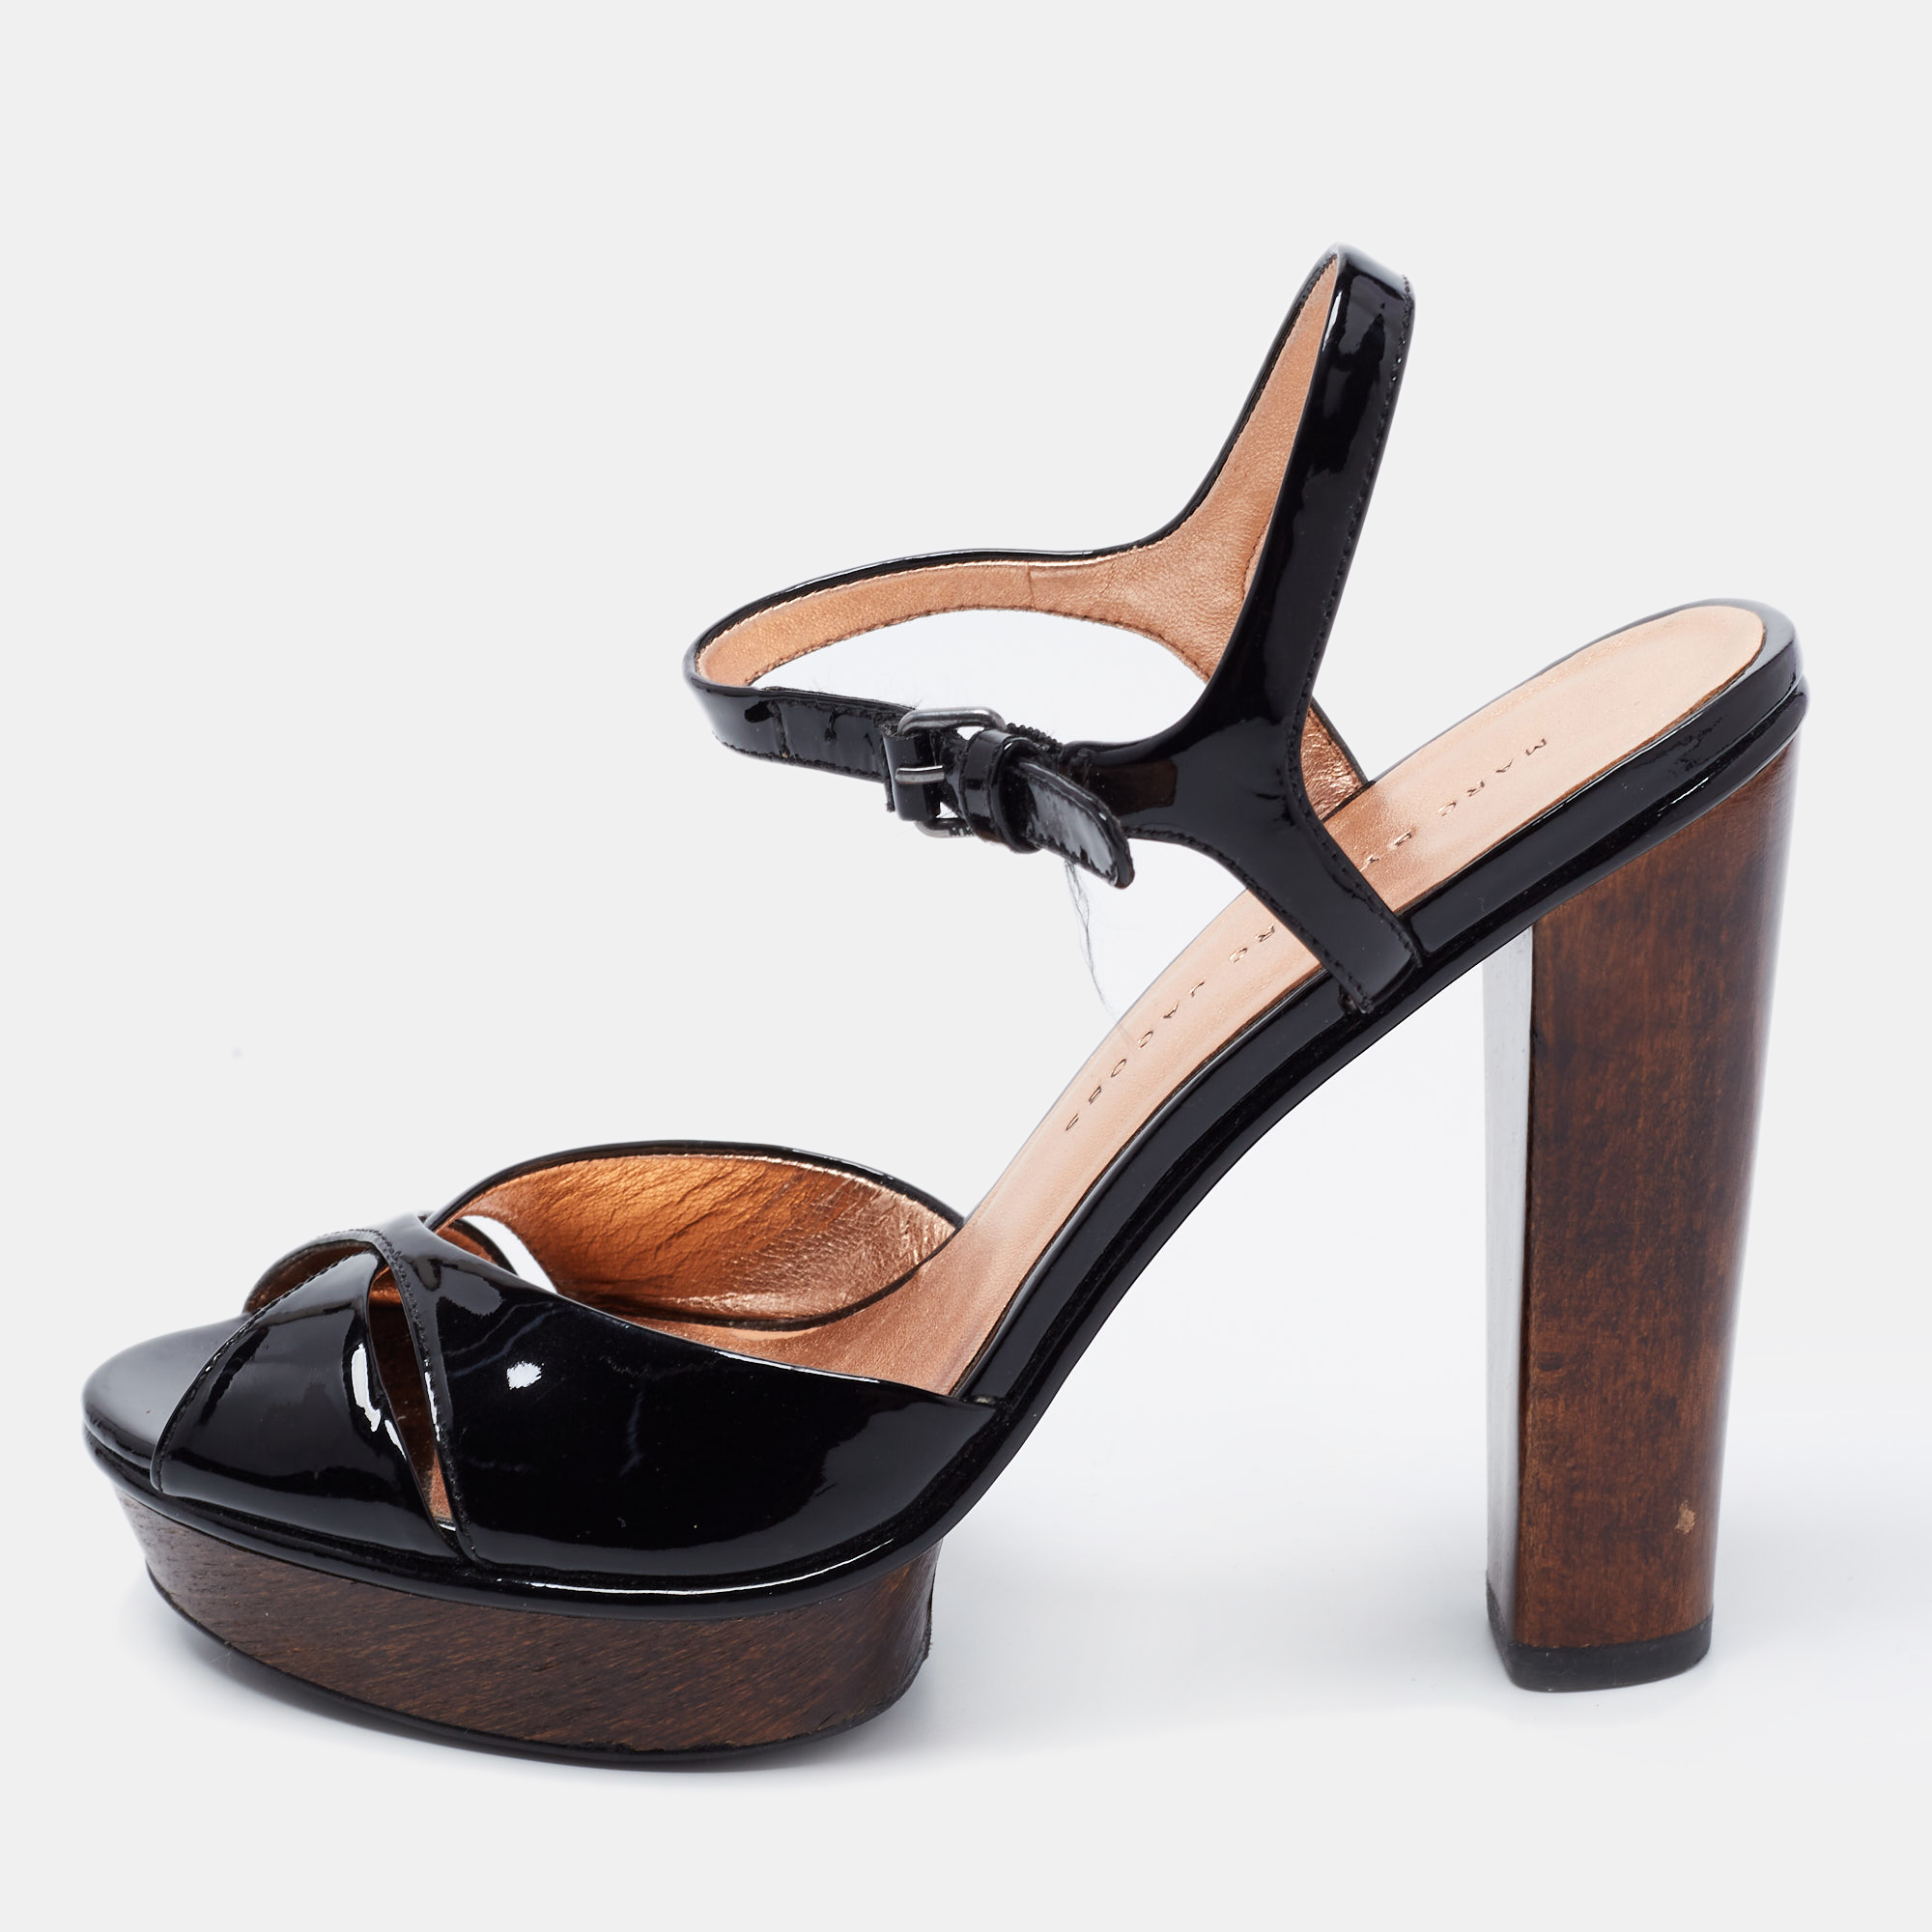 Pre-owned Marc By Marc Jacobs Black Patent Leather Ankle Strap Platform Sandals Size 37